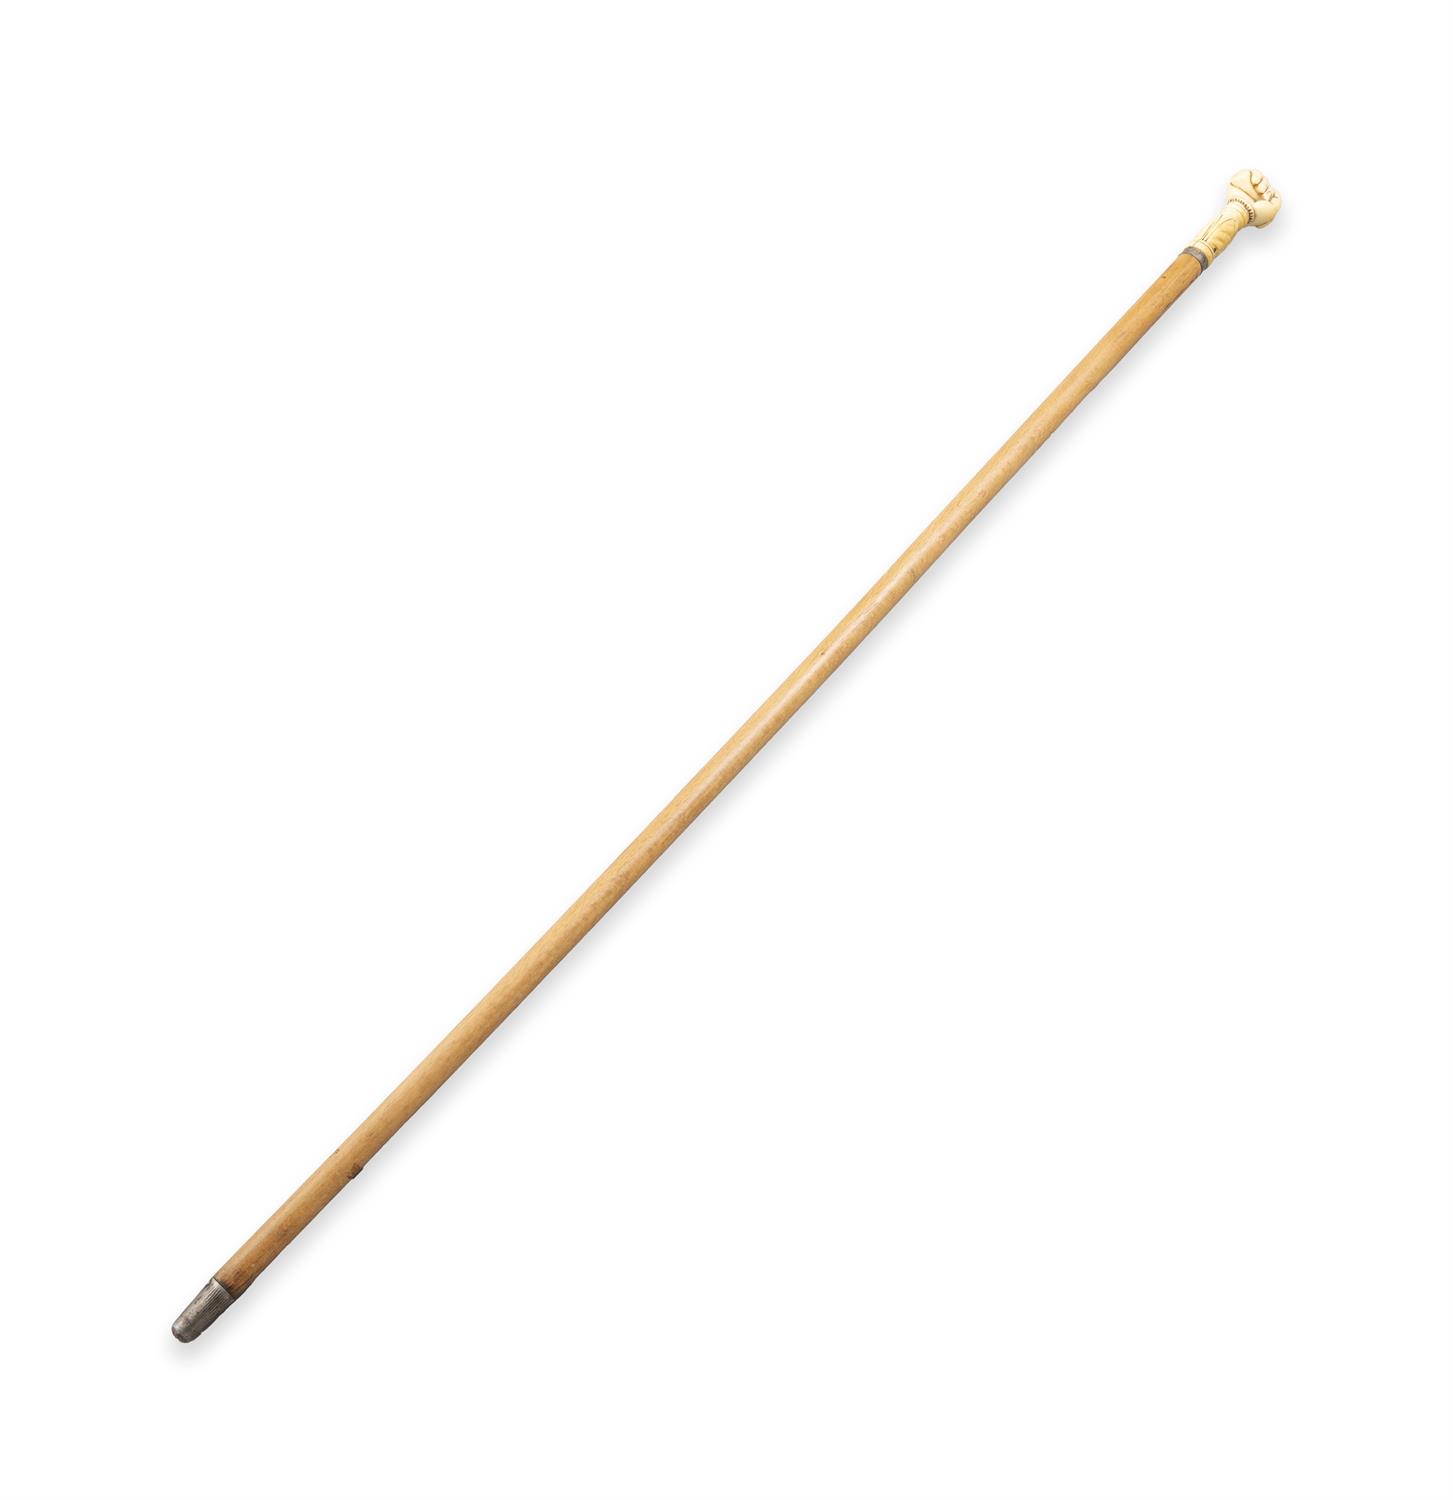 *A WOODEN WALKING CANE, with carved ivory handle in the shape of a fist enclosing a seal,